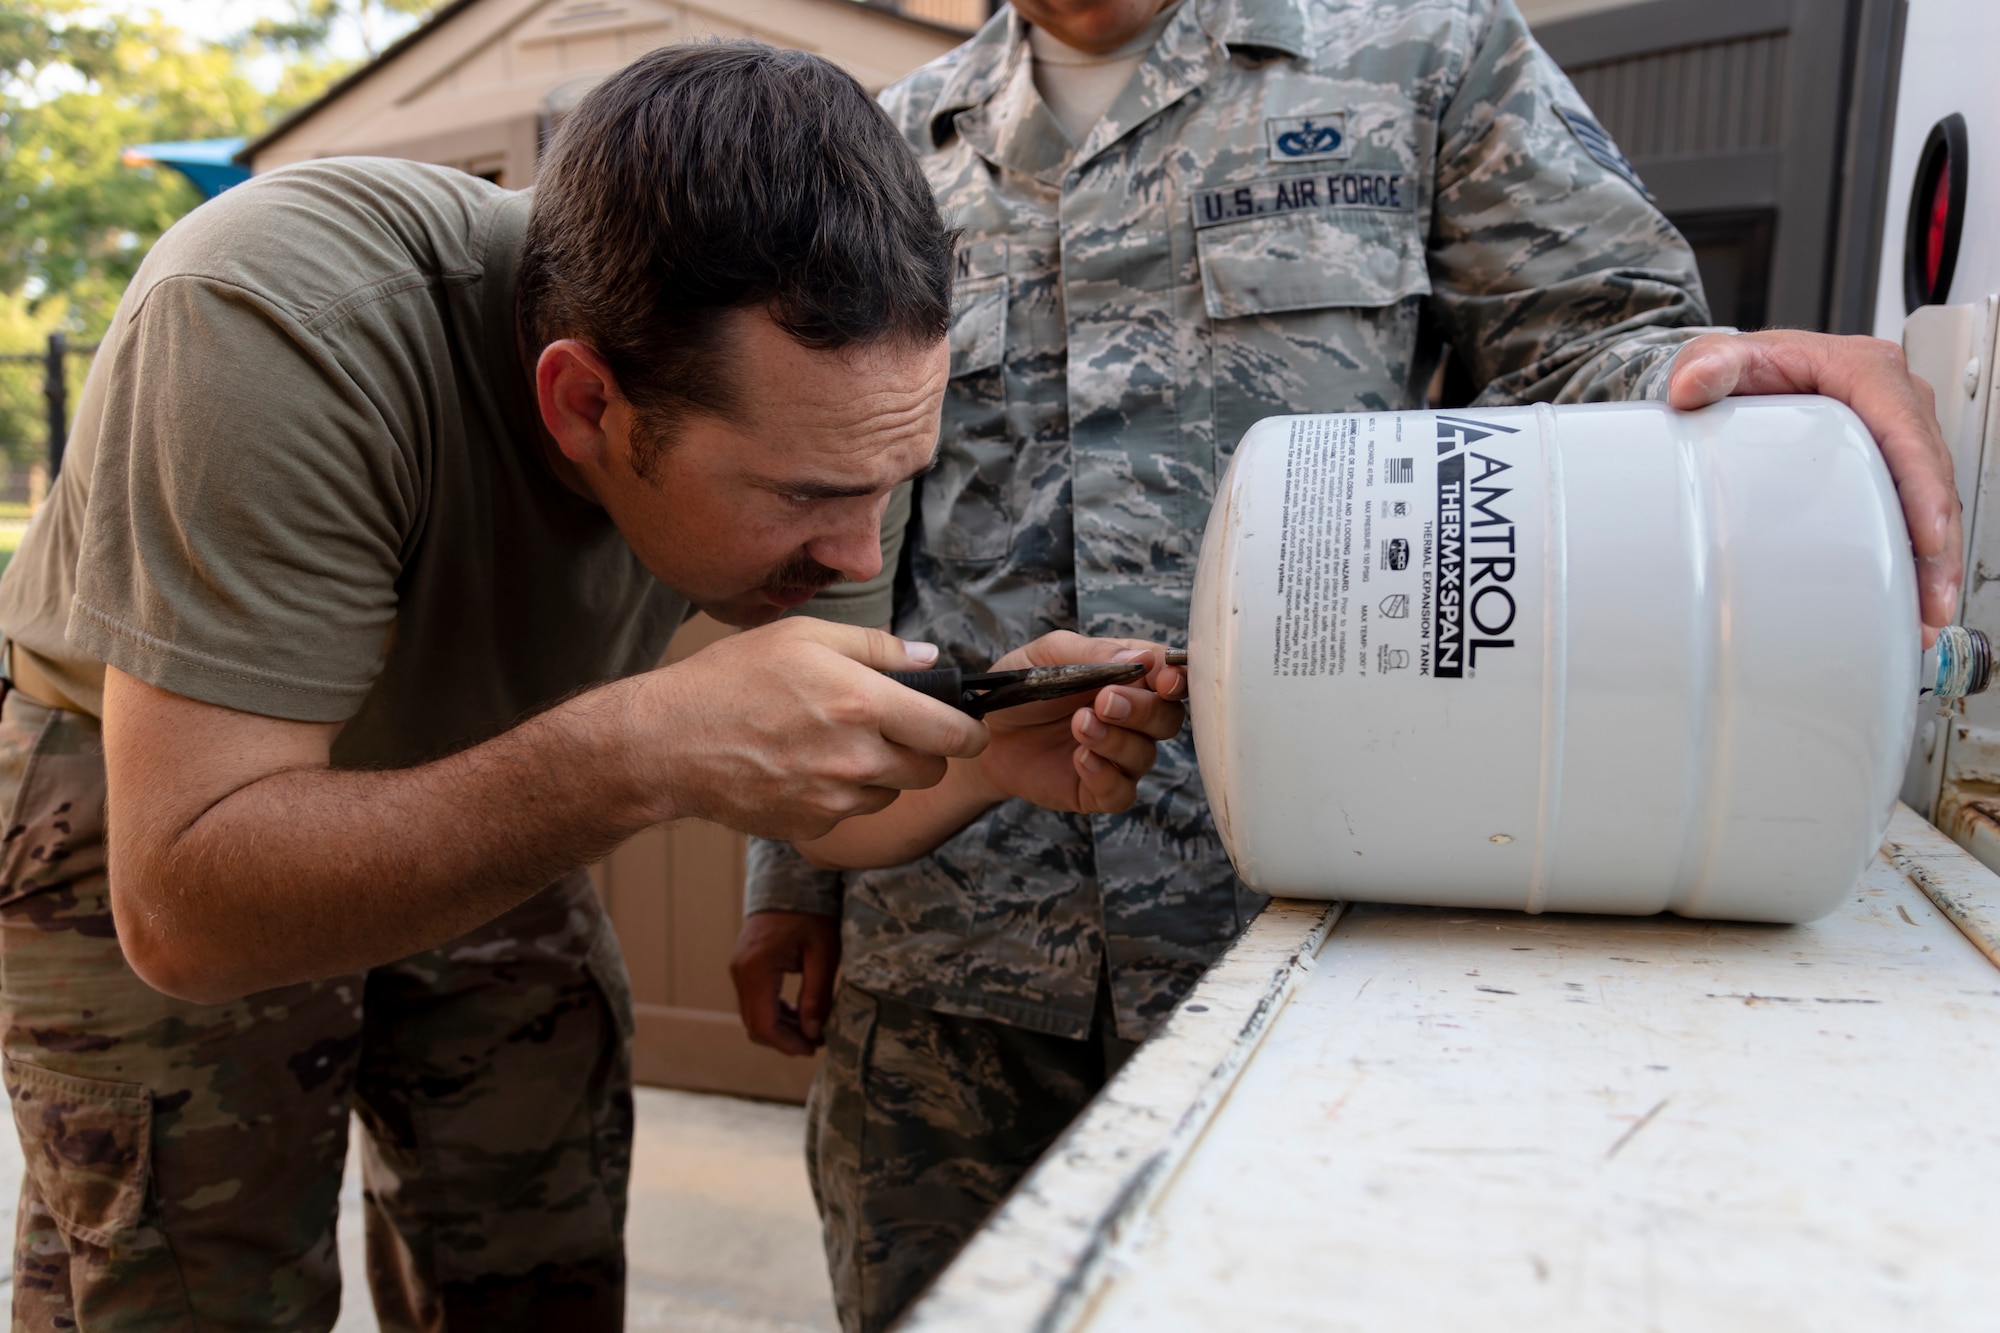 Staff Sgt. Daniel Champion, 23d Civil Engineer Squadron (CES) water and fuel systems maintenance craftsman, inspects an expansion tank, July 2, 2019, at Moody Air Force Base, Ga. Airmen from the 23d CES Water and Fuels Systems Maintenance are on-call 24/7 to sustain and maintain the base, water, sewer and gas lines and upkeep of the 696 facilities with water and fuel infrastructure. (U.S. Air Force photo by Airman 1st Class Taryn Butler)